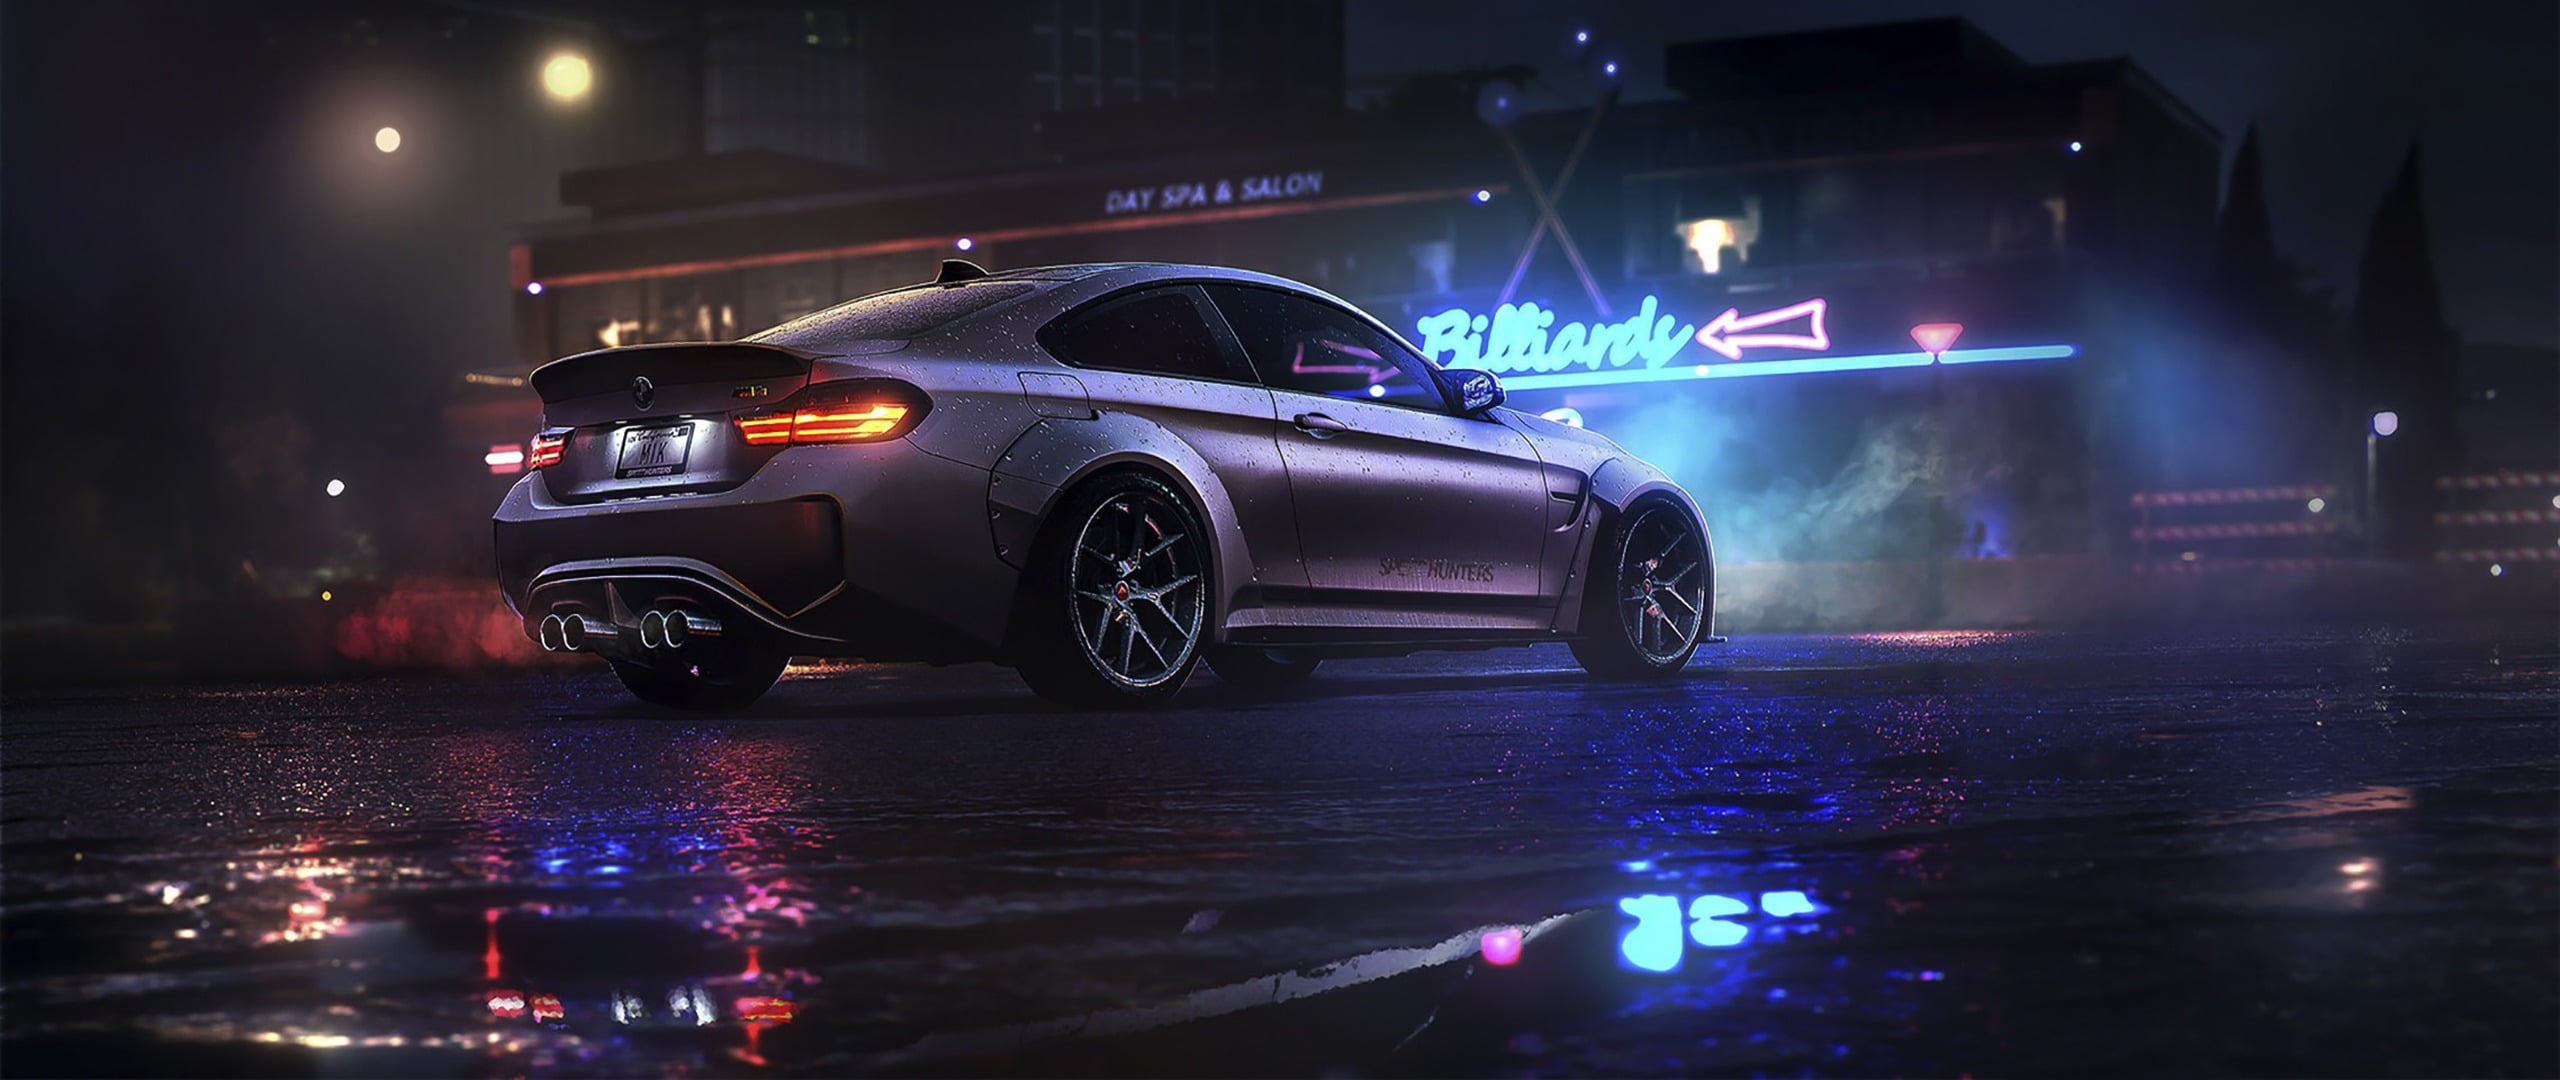 Wallpaper Silver Bmw Coupe Animation Ultra Wide Car Need For Speed Mode Of Transportation Wallpaper For You Hd Wallpaper For Desktop Mobile